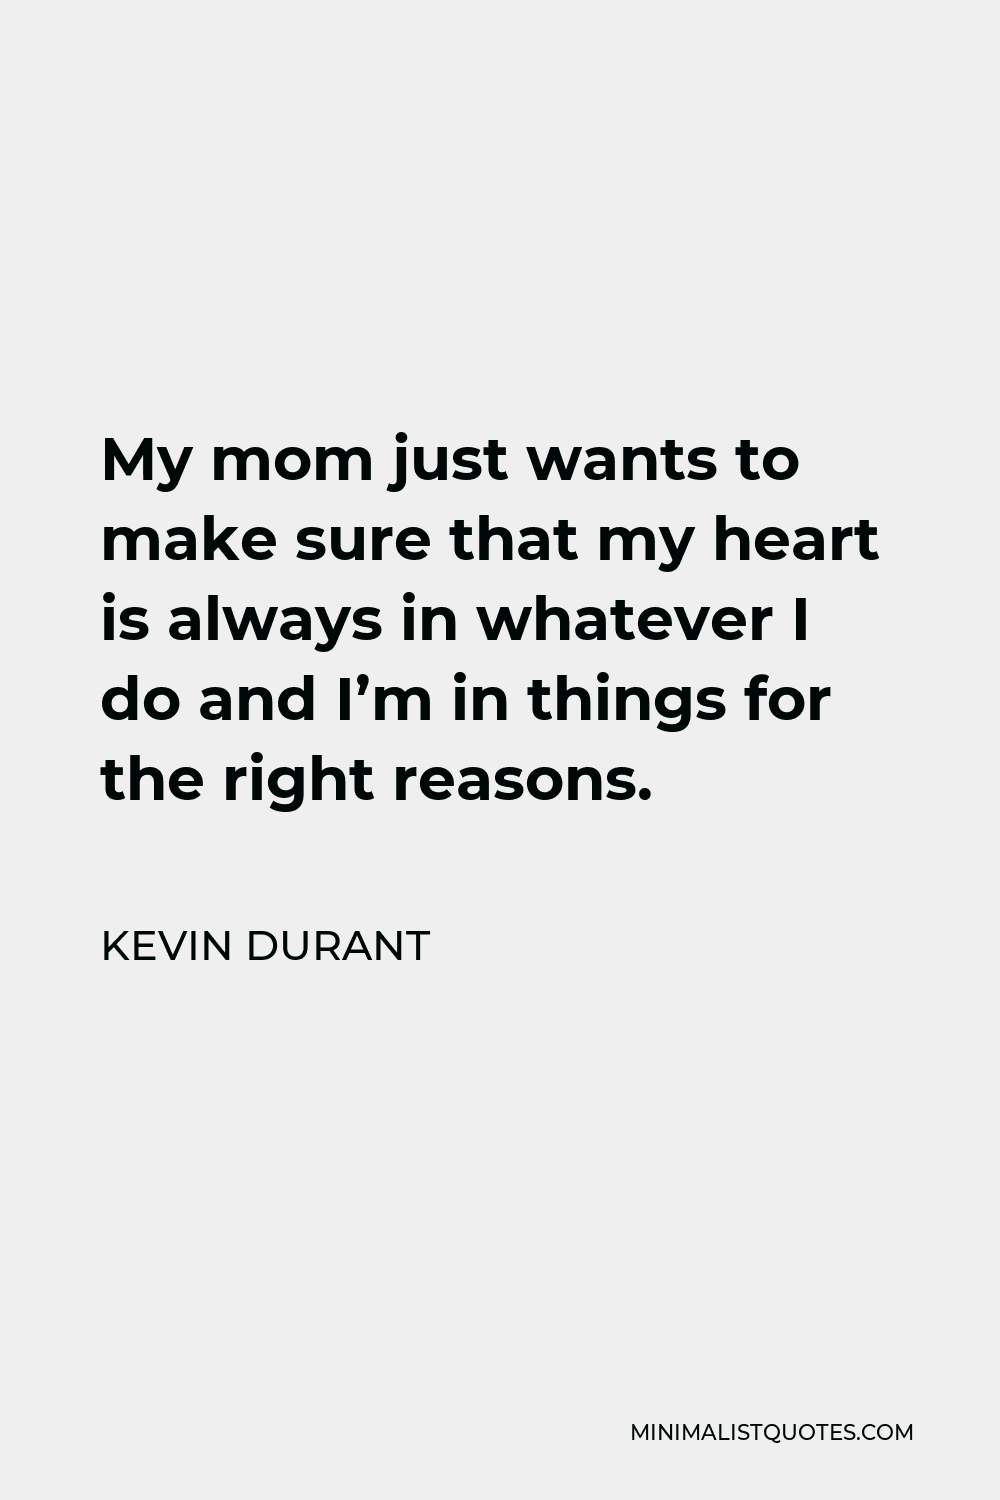 Kevin Durant Quote - My mom just wants to make sure that my heart is always in whatever I do and I’m in things for the right reasons.